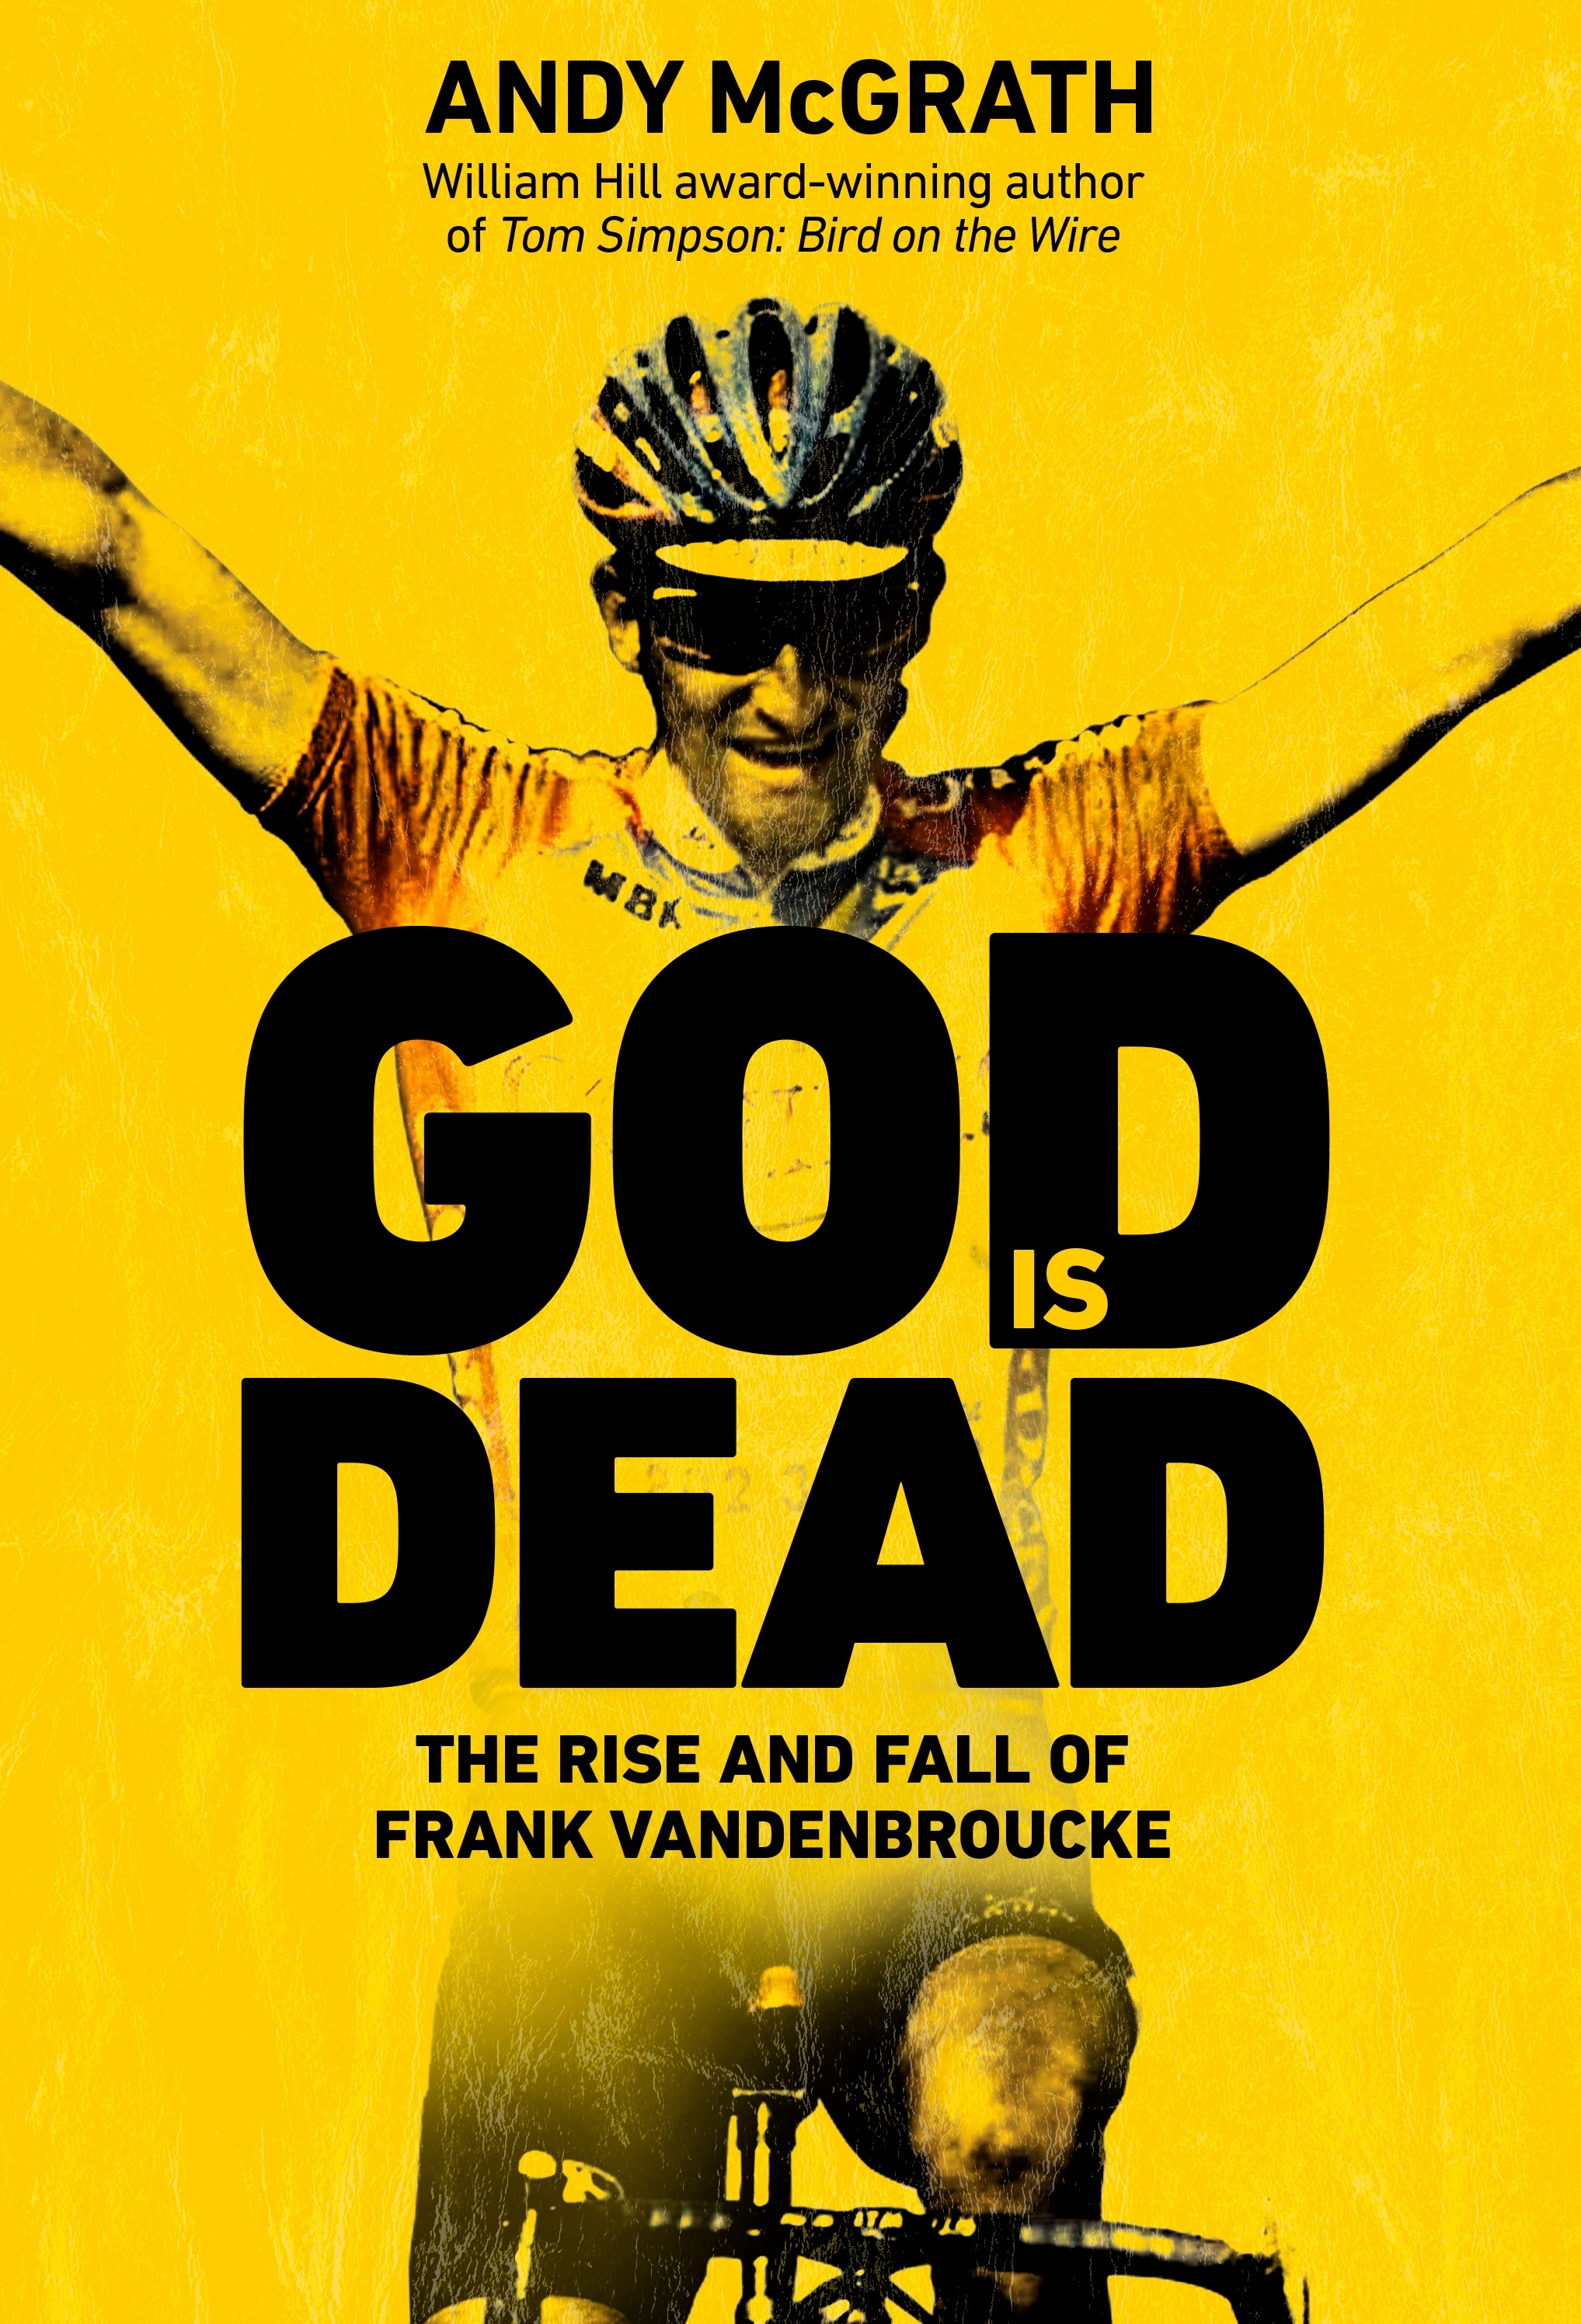 Book “God is Dead” by Andy McGrath — March 10, 2022